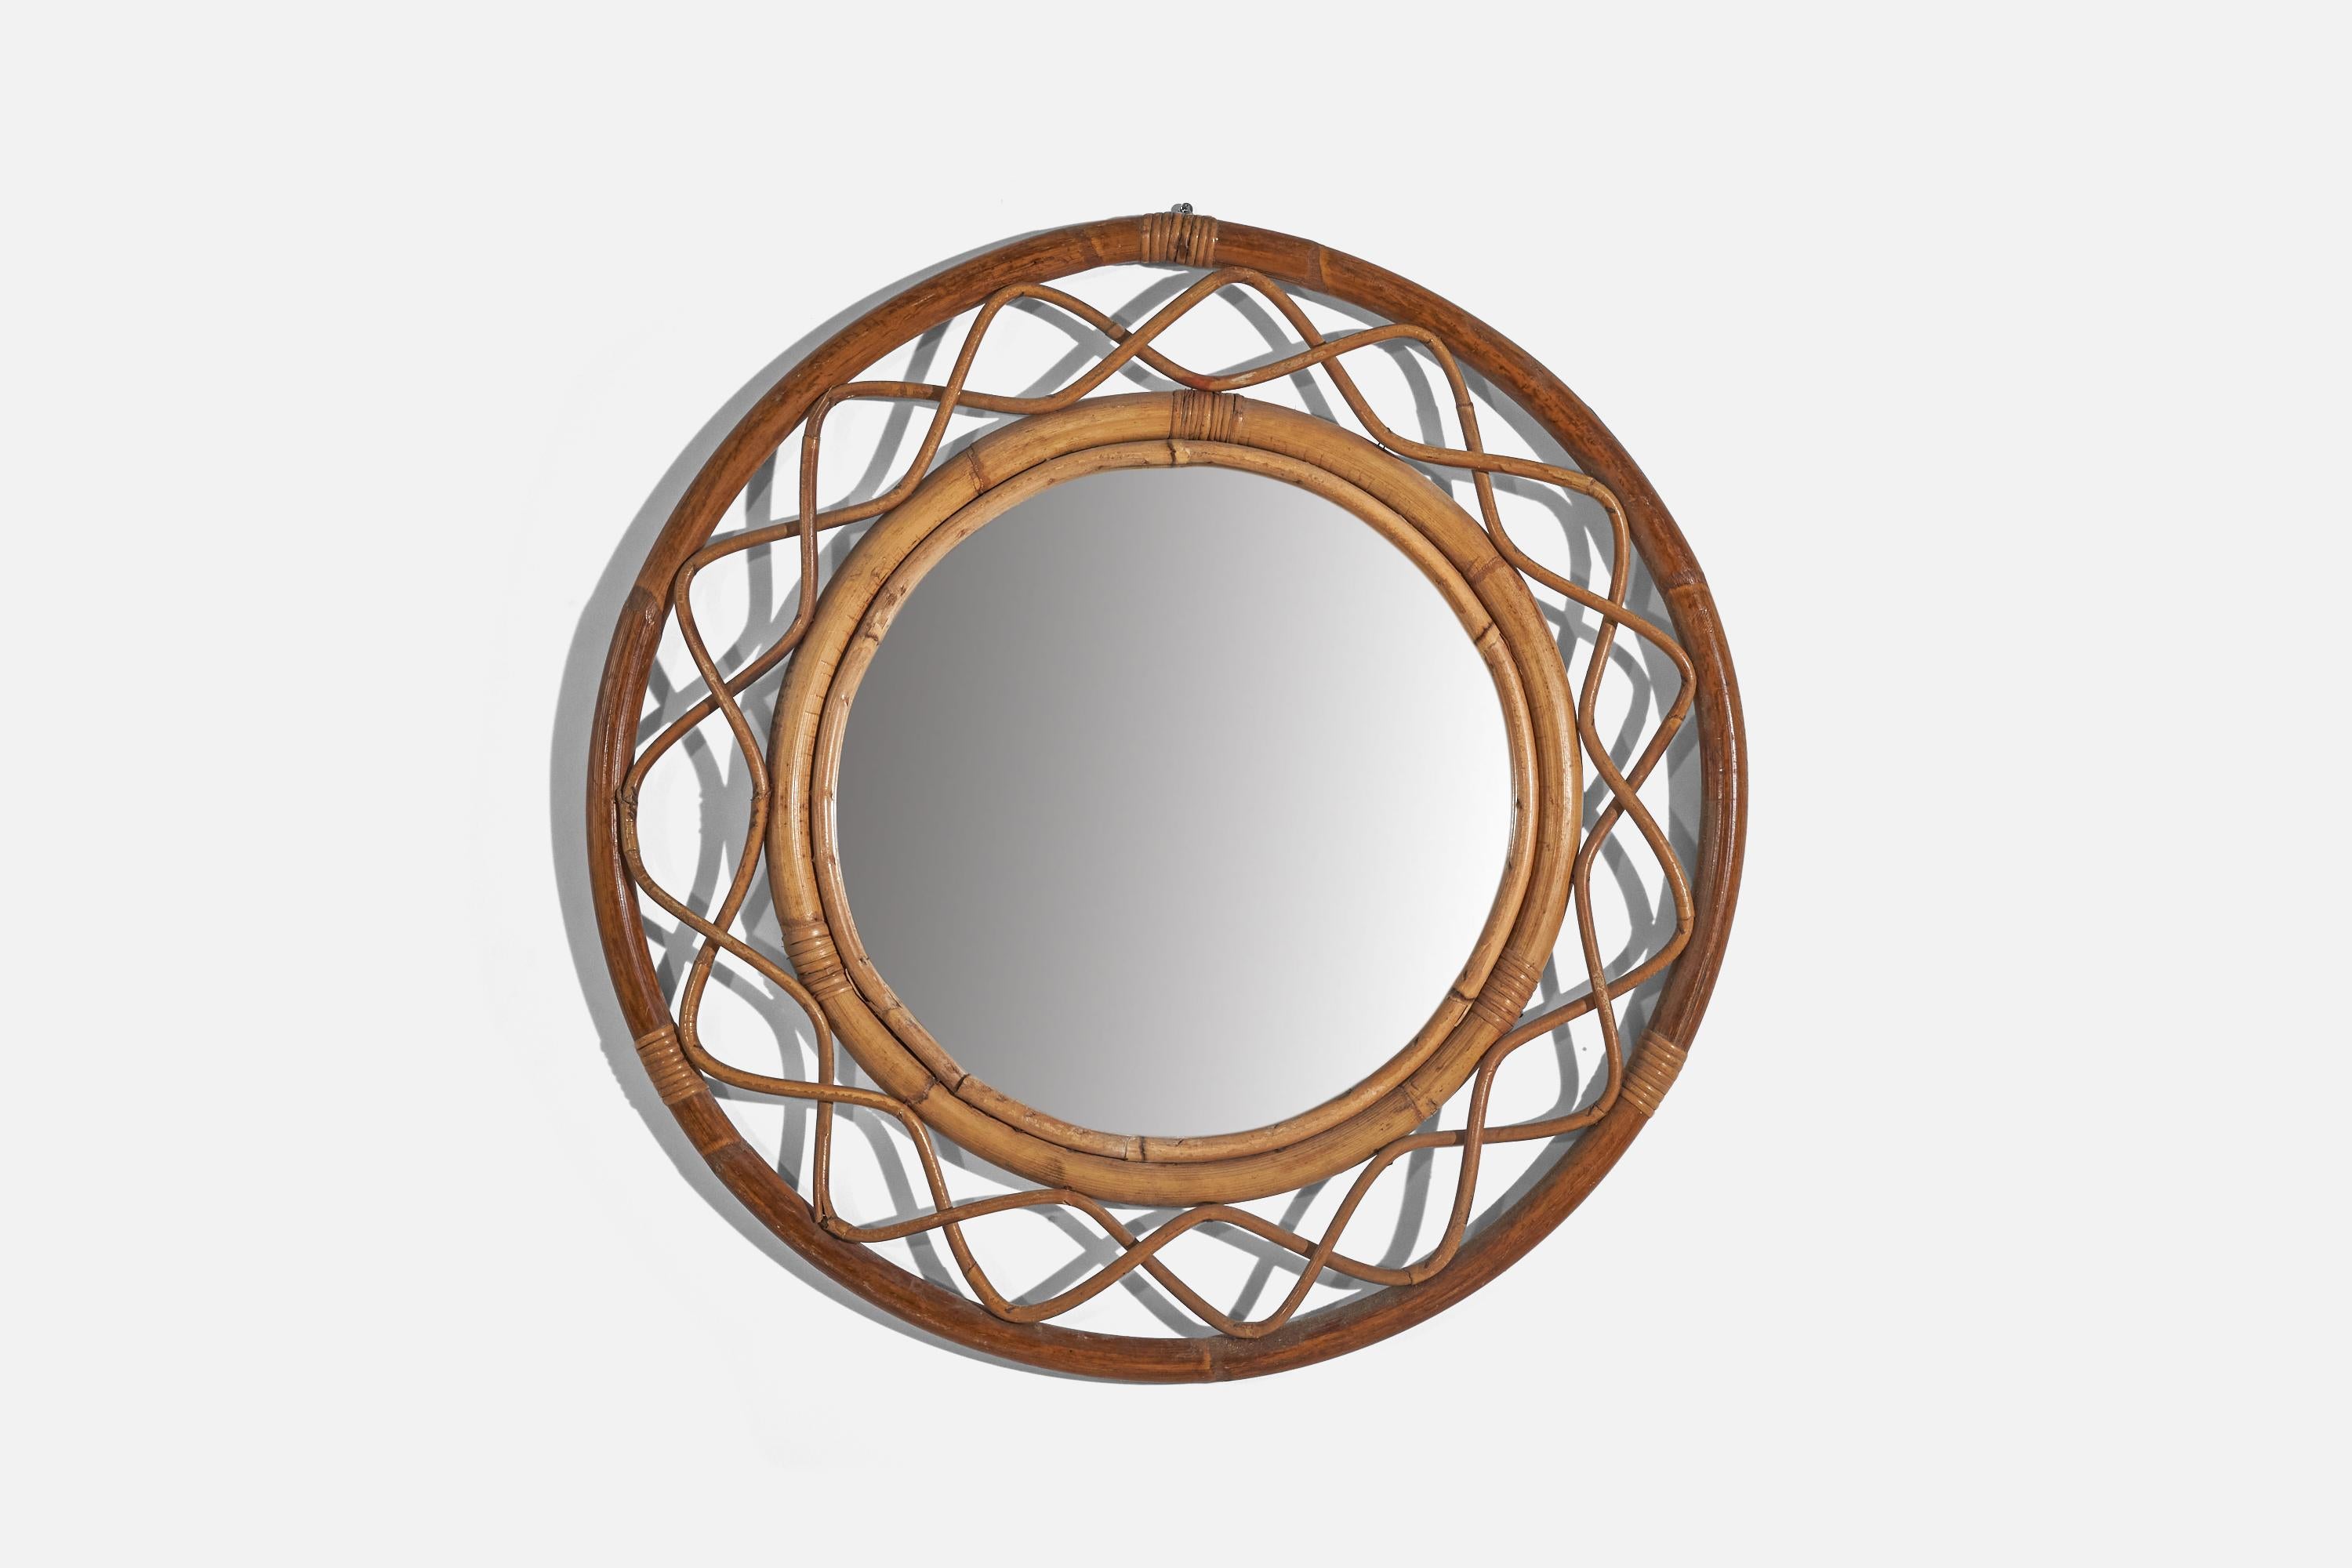 A rattan and bamboo wall mirror designed and produced by an Italian designer, Italy, c. 1960s.
 